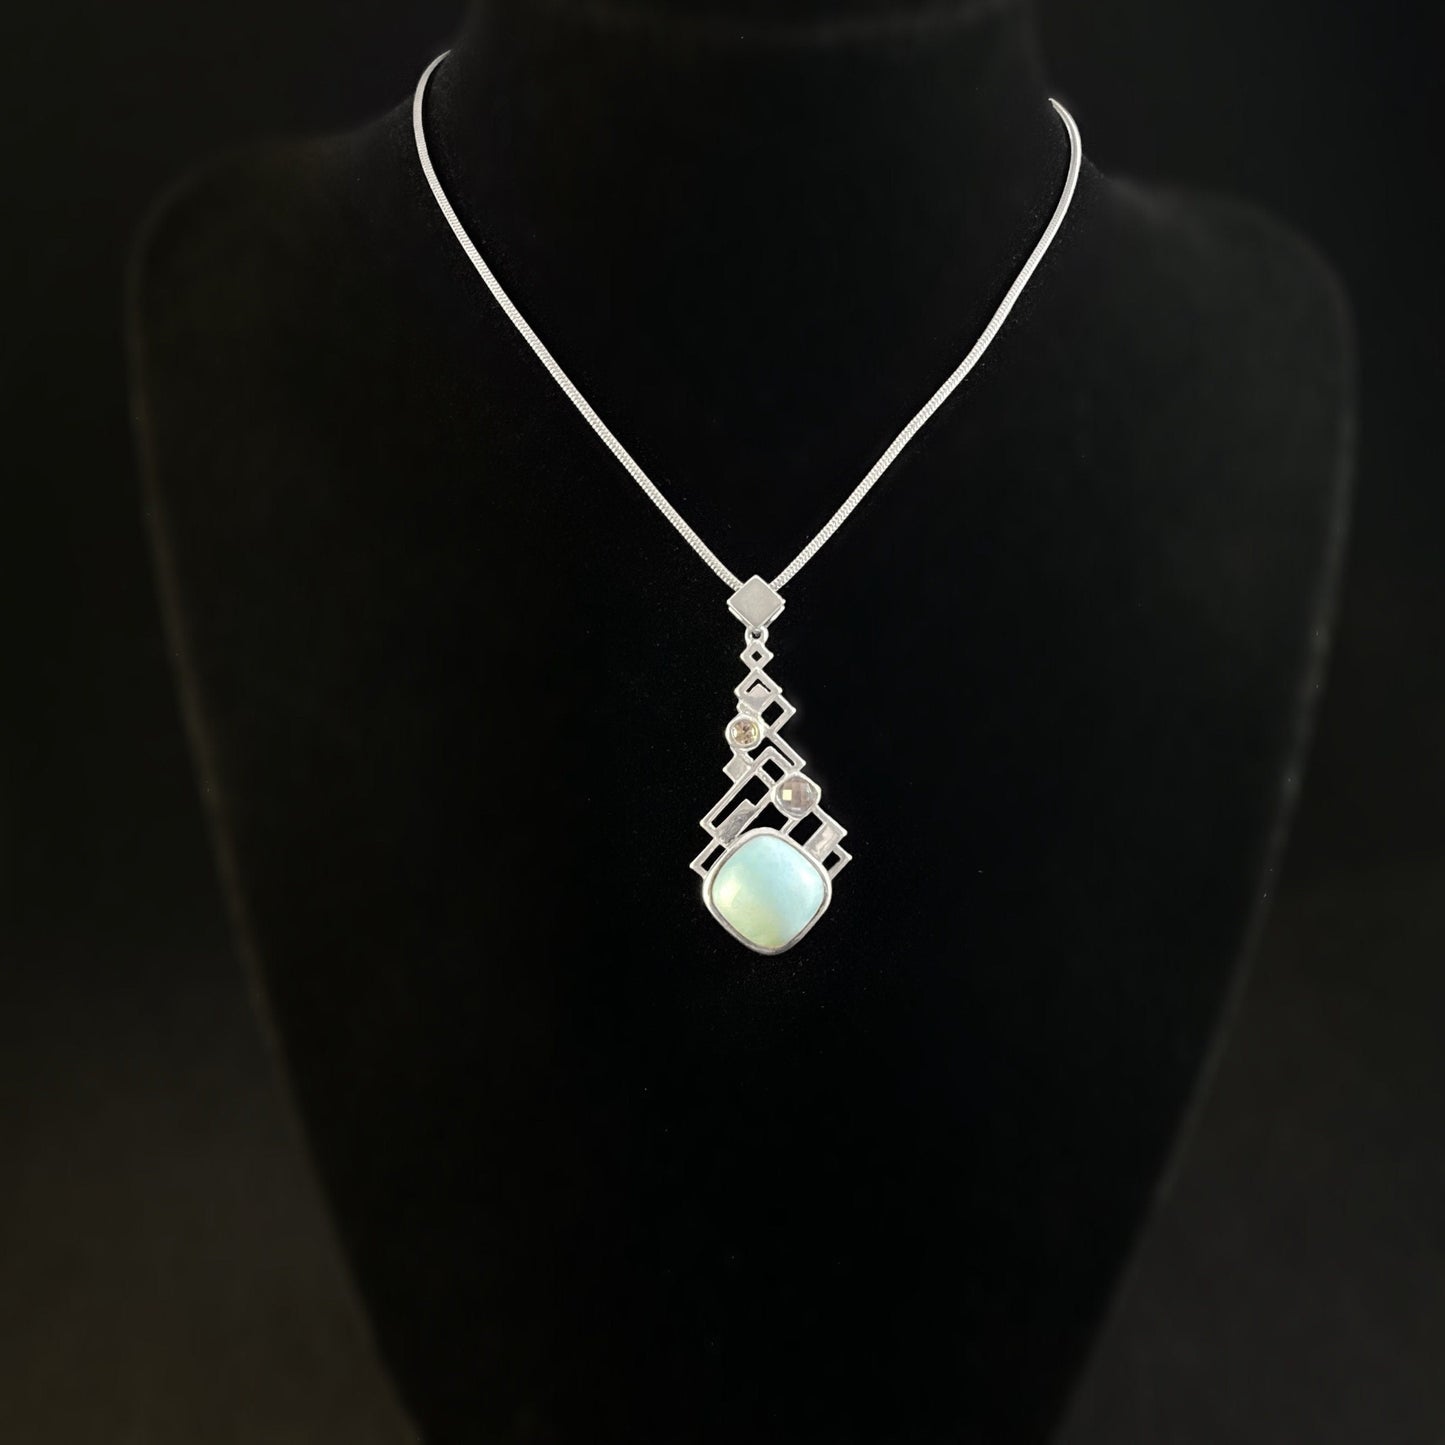 Marahlago Larimar and Sterling Silver Pixel Necklace